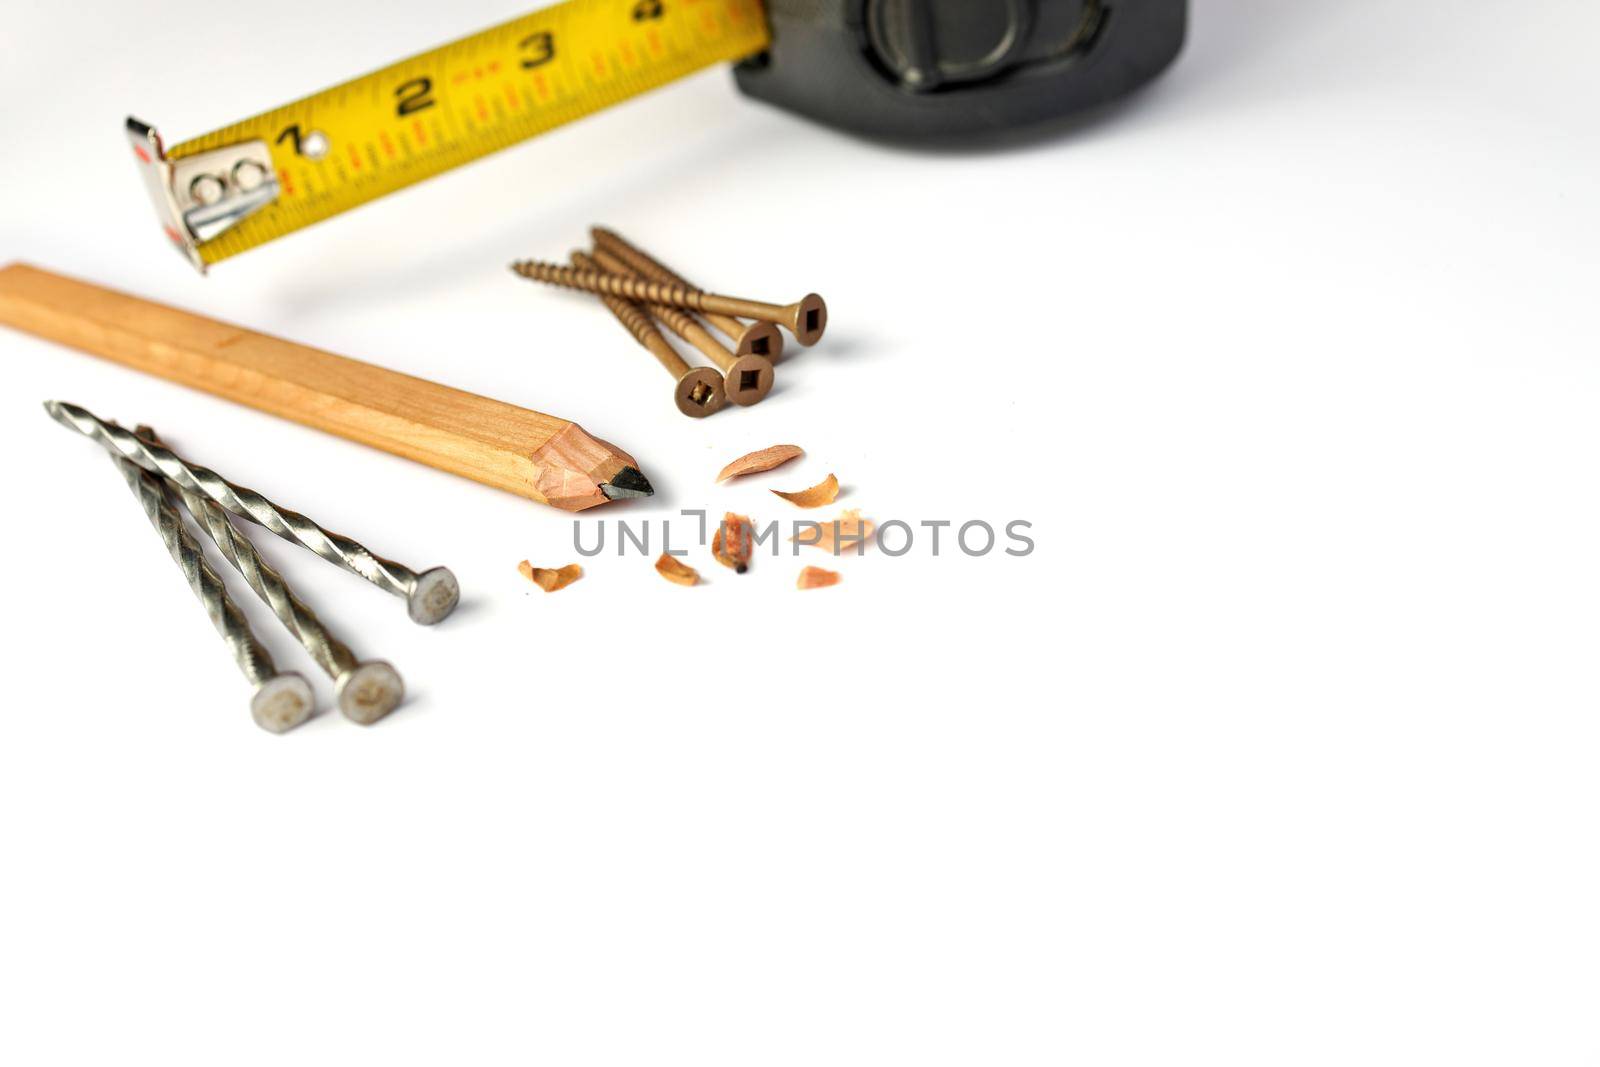 Low Angle Close up of a Carpenter's Pencil with Sharpening Shavings, Tape Measure, Framing Nails and Deck Screws on a white background. High quality photo